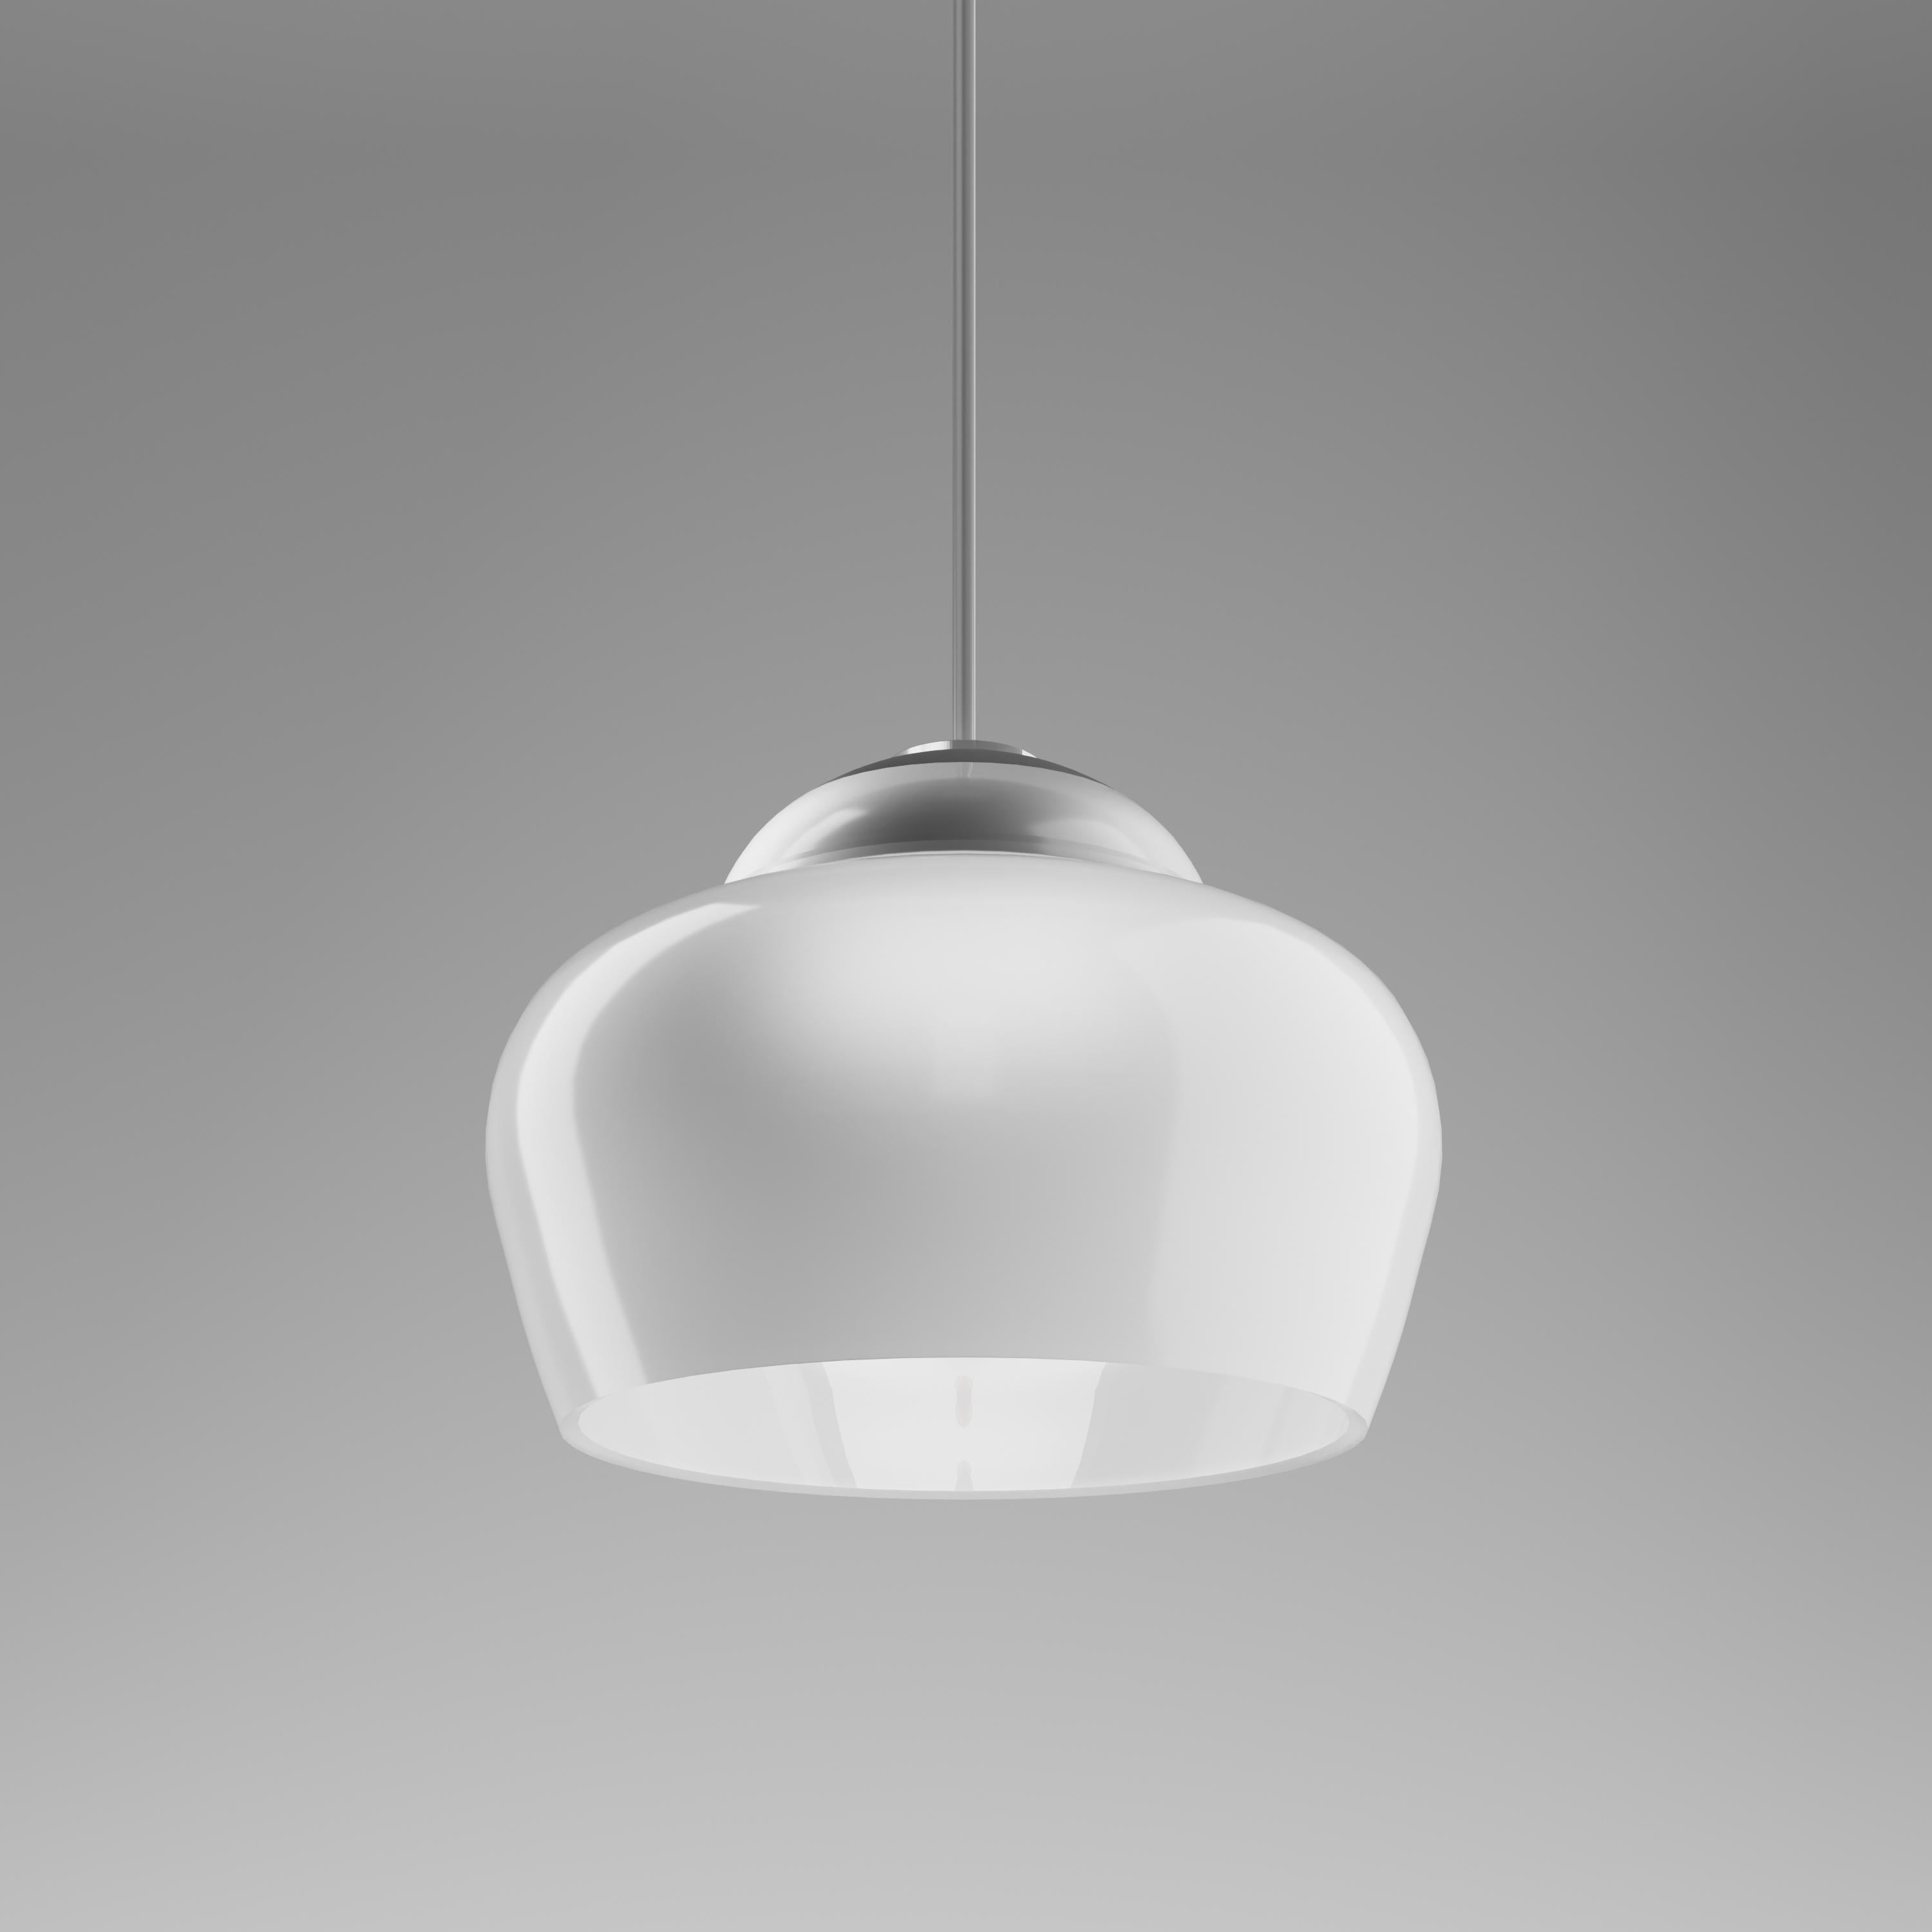 The main idea of the collection is built around a lampshade, characterized by the convexity at the top and the sfumato technique of the crystal, which allows light to radiate and spread comfortably in the environment.

Light source: LED 12.5W